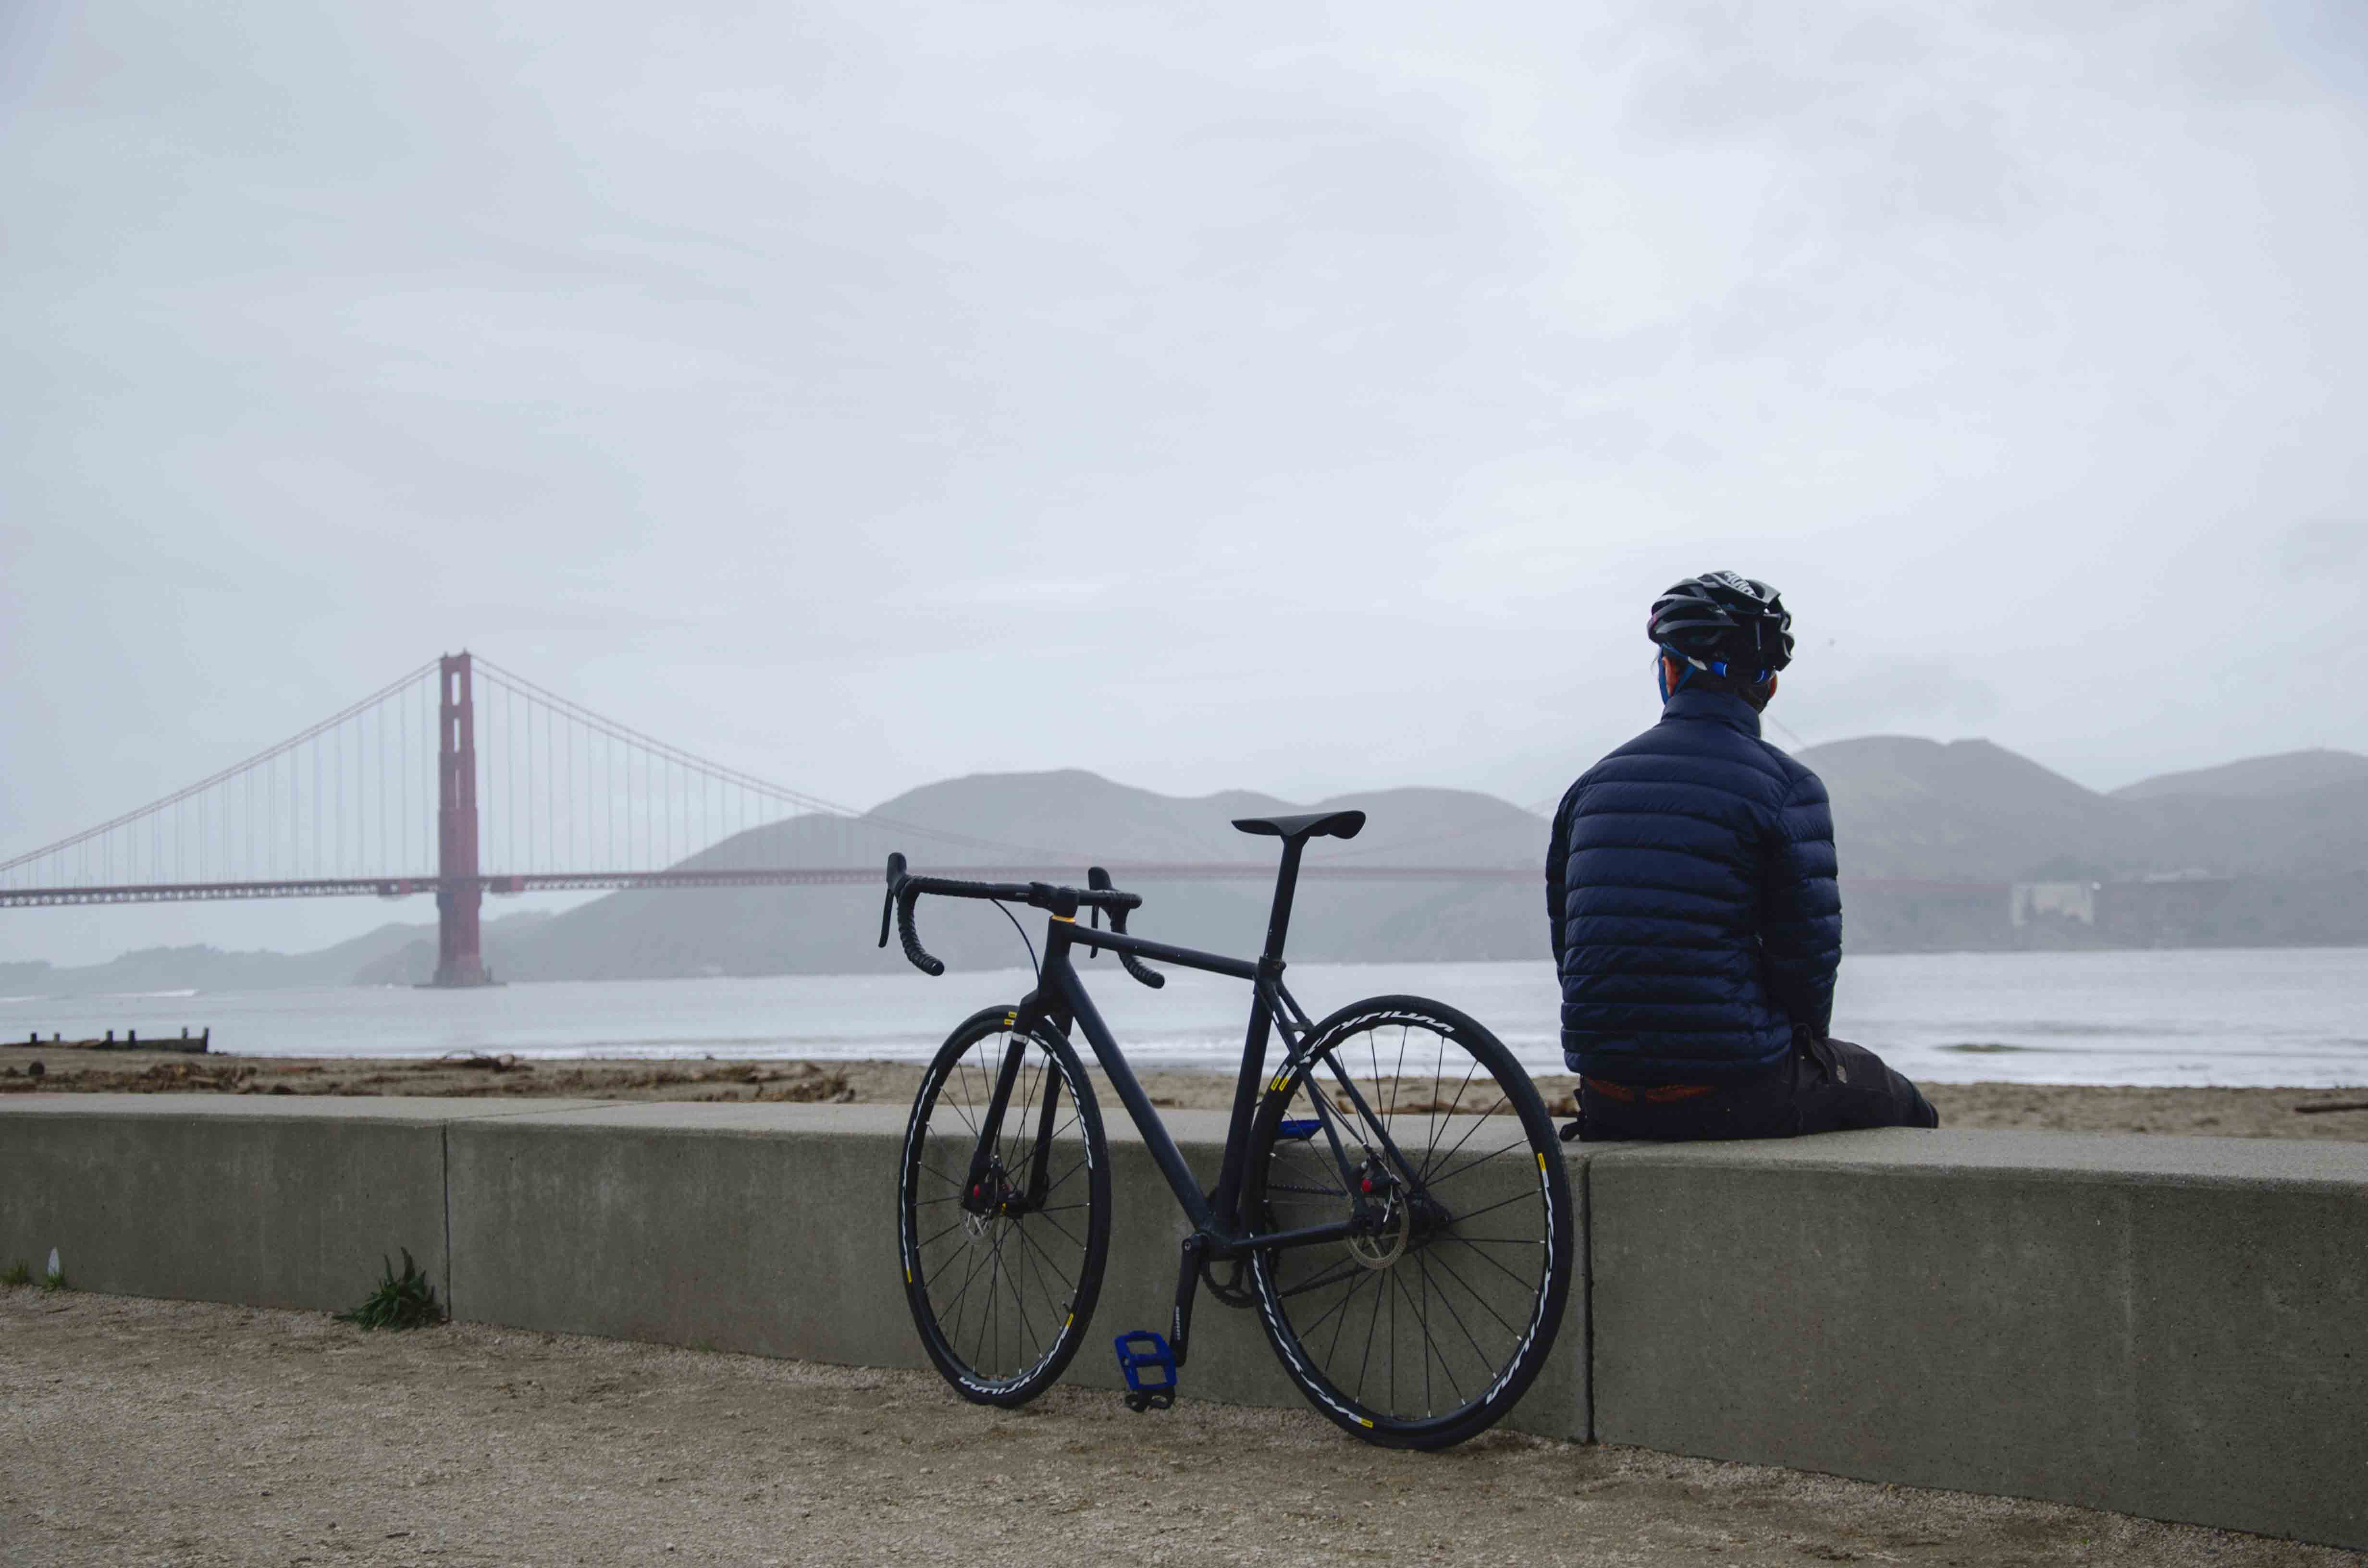 Sculpteo 3D Printed Bike is Going on the Road Across the US!